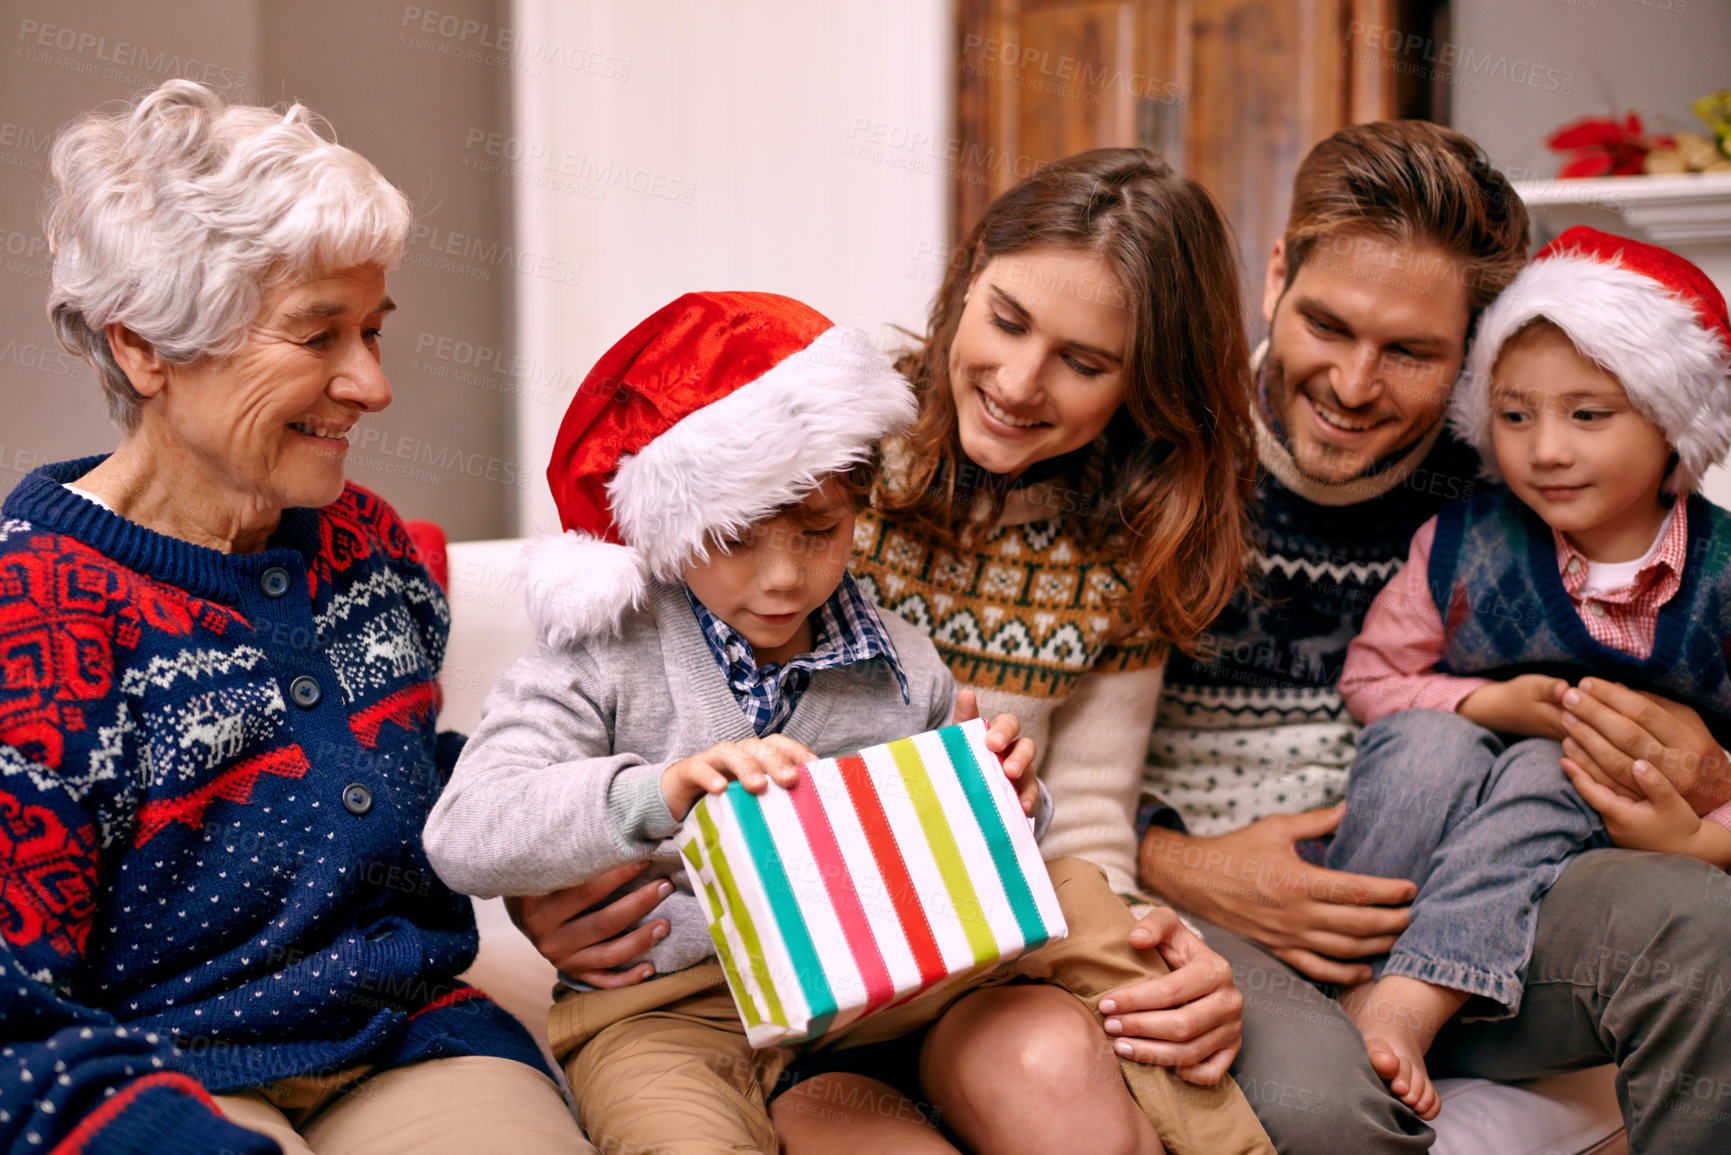 Buy stock photo Shot of a family enjoying themselves at Christmas